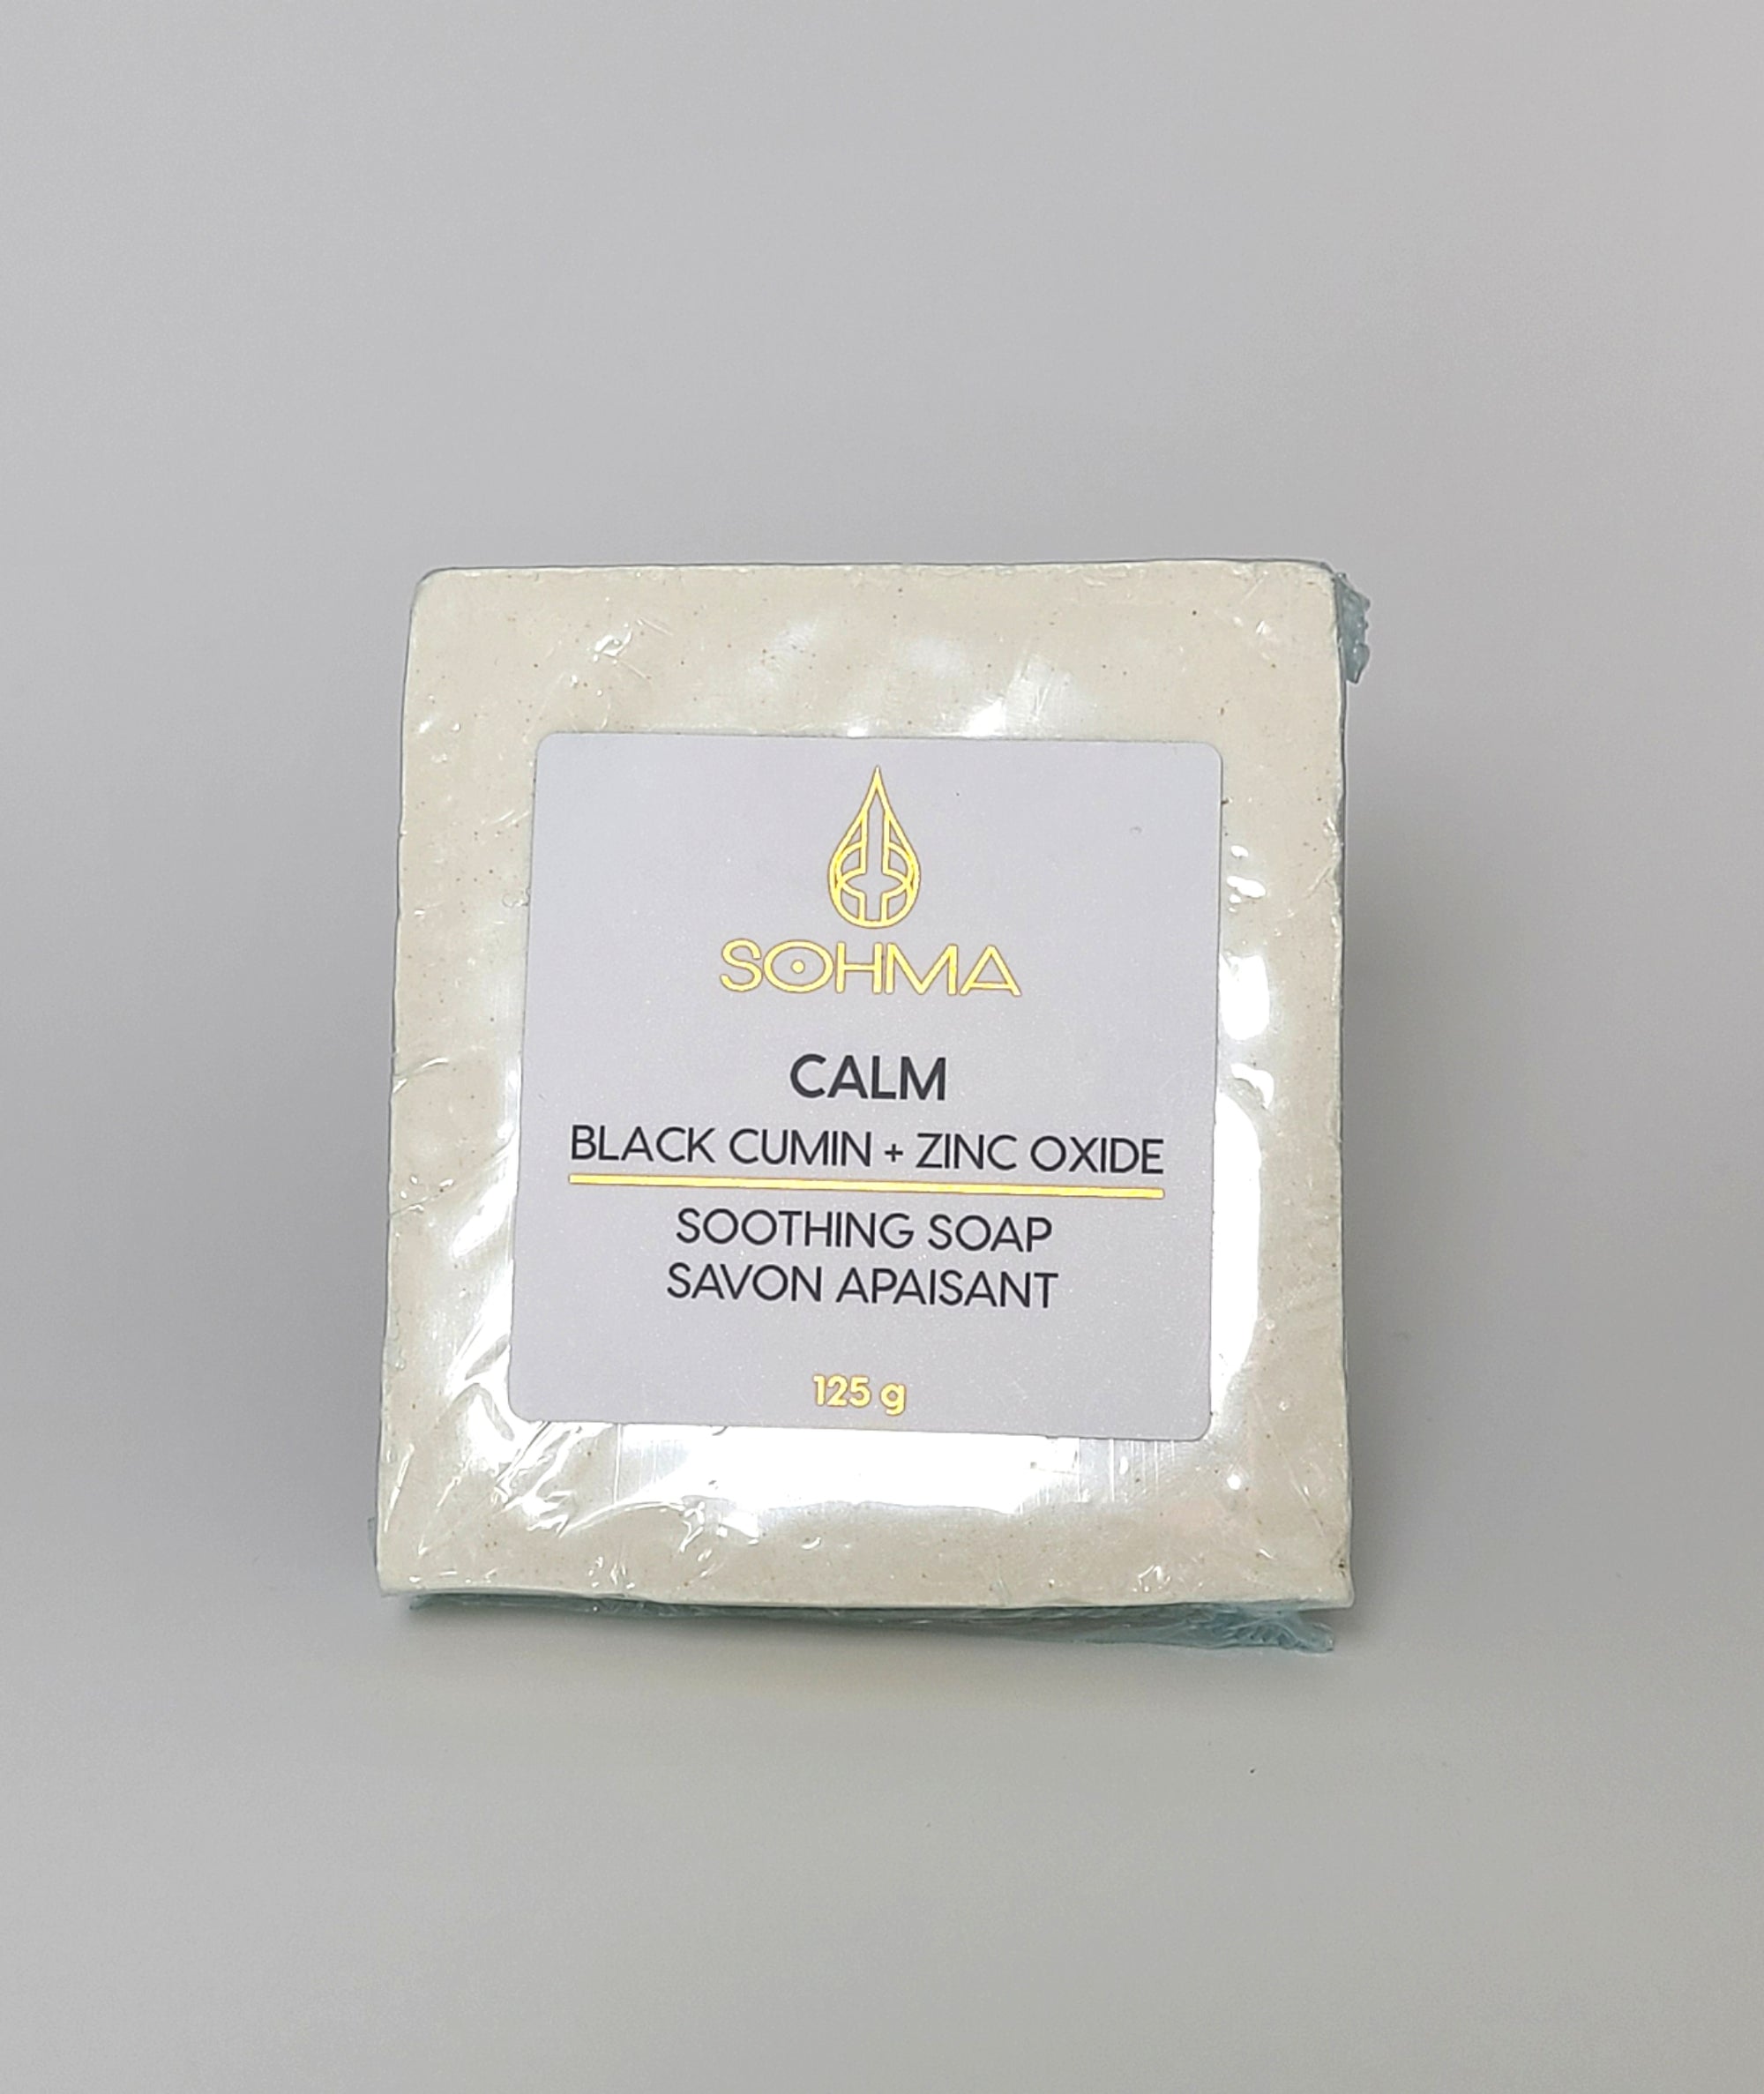 CALM Soothing Soap